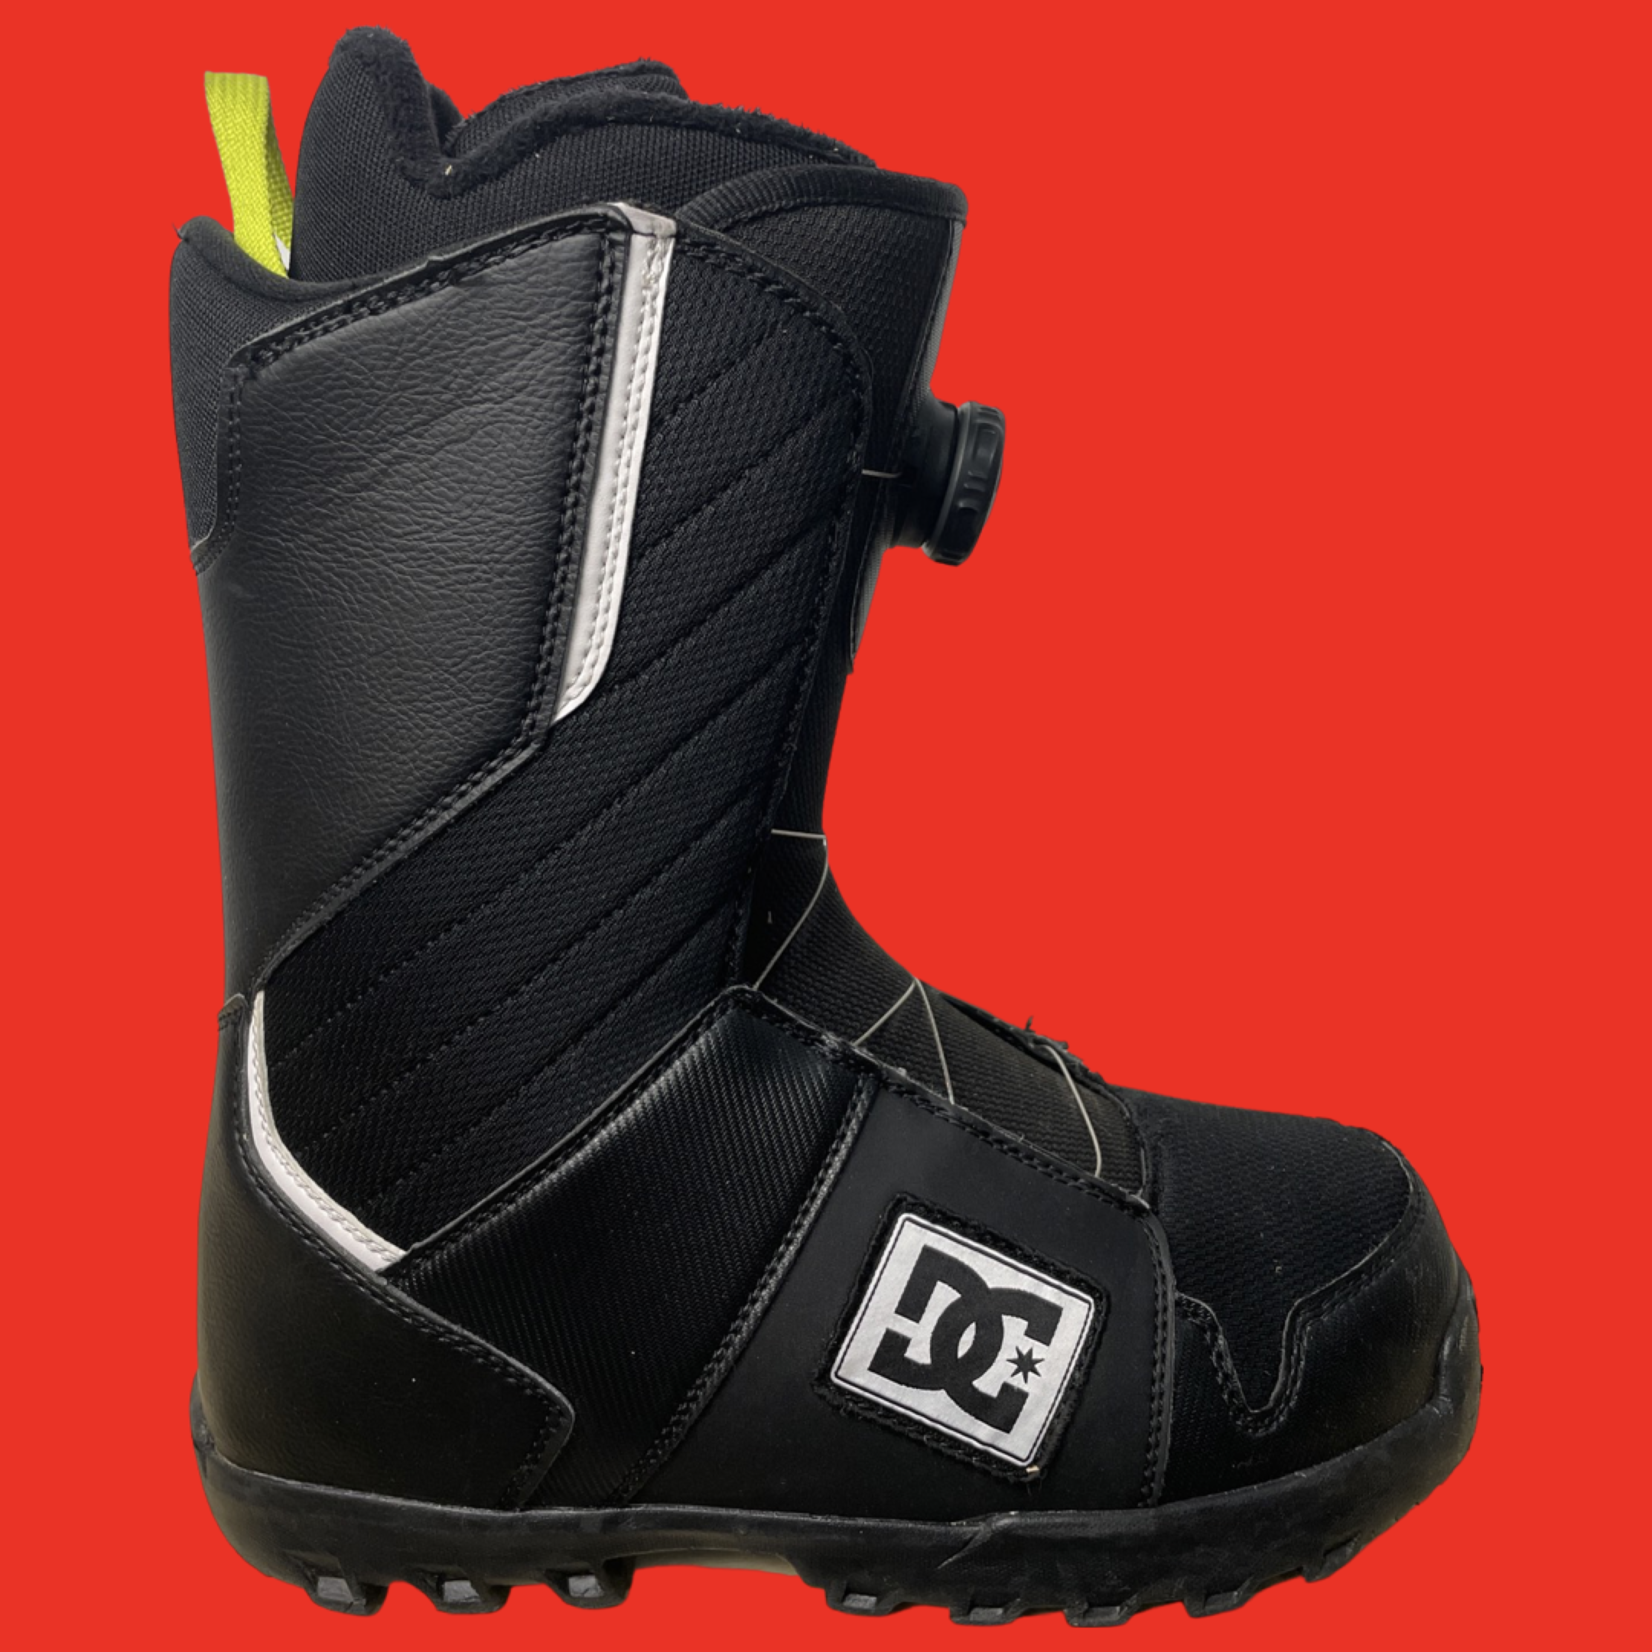 DC DC Scout Boa Snowboard Boots, Size 7 MENS